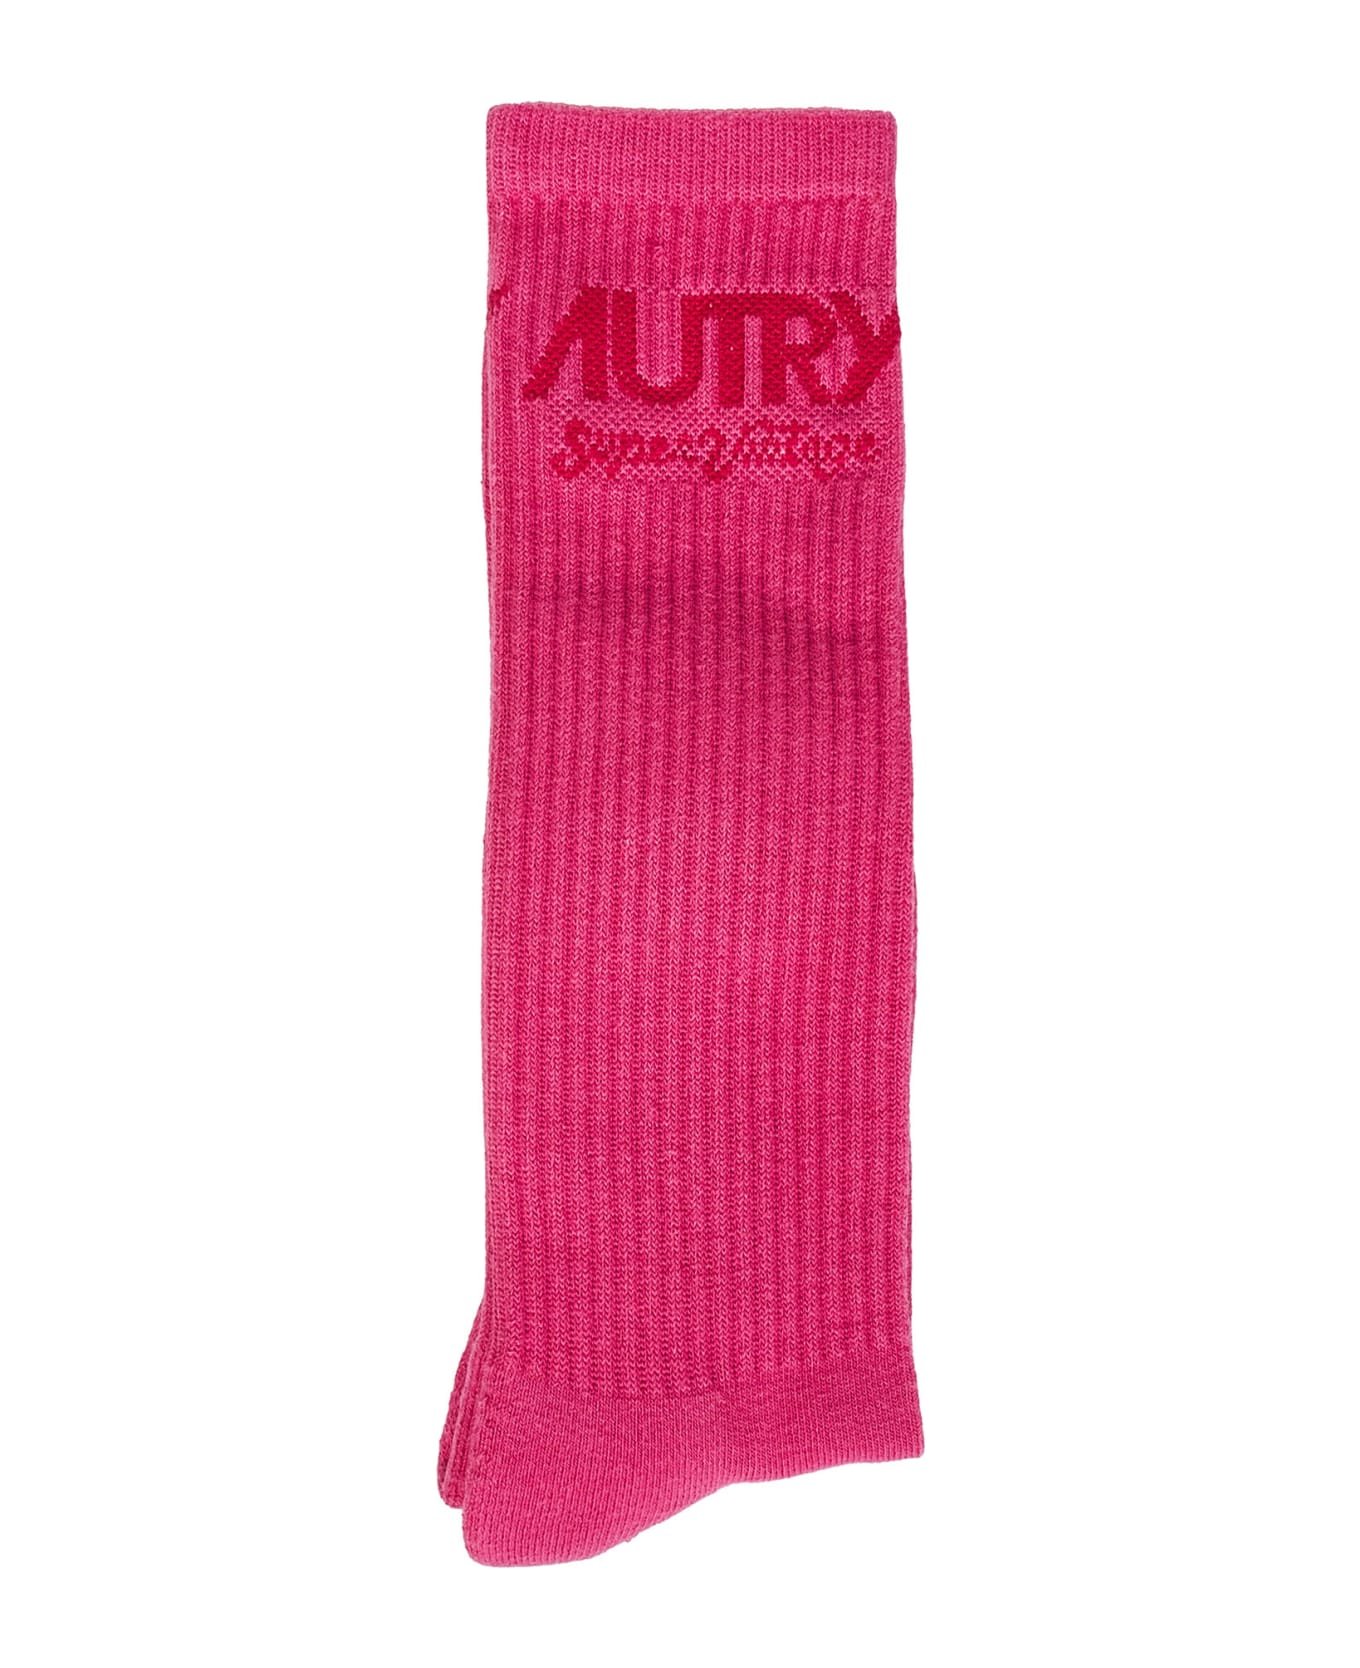 Autry Supervintage Socks - Tinto Pink 靴下